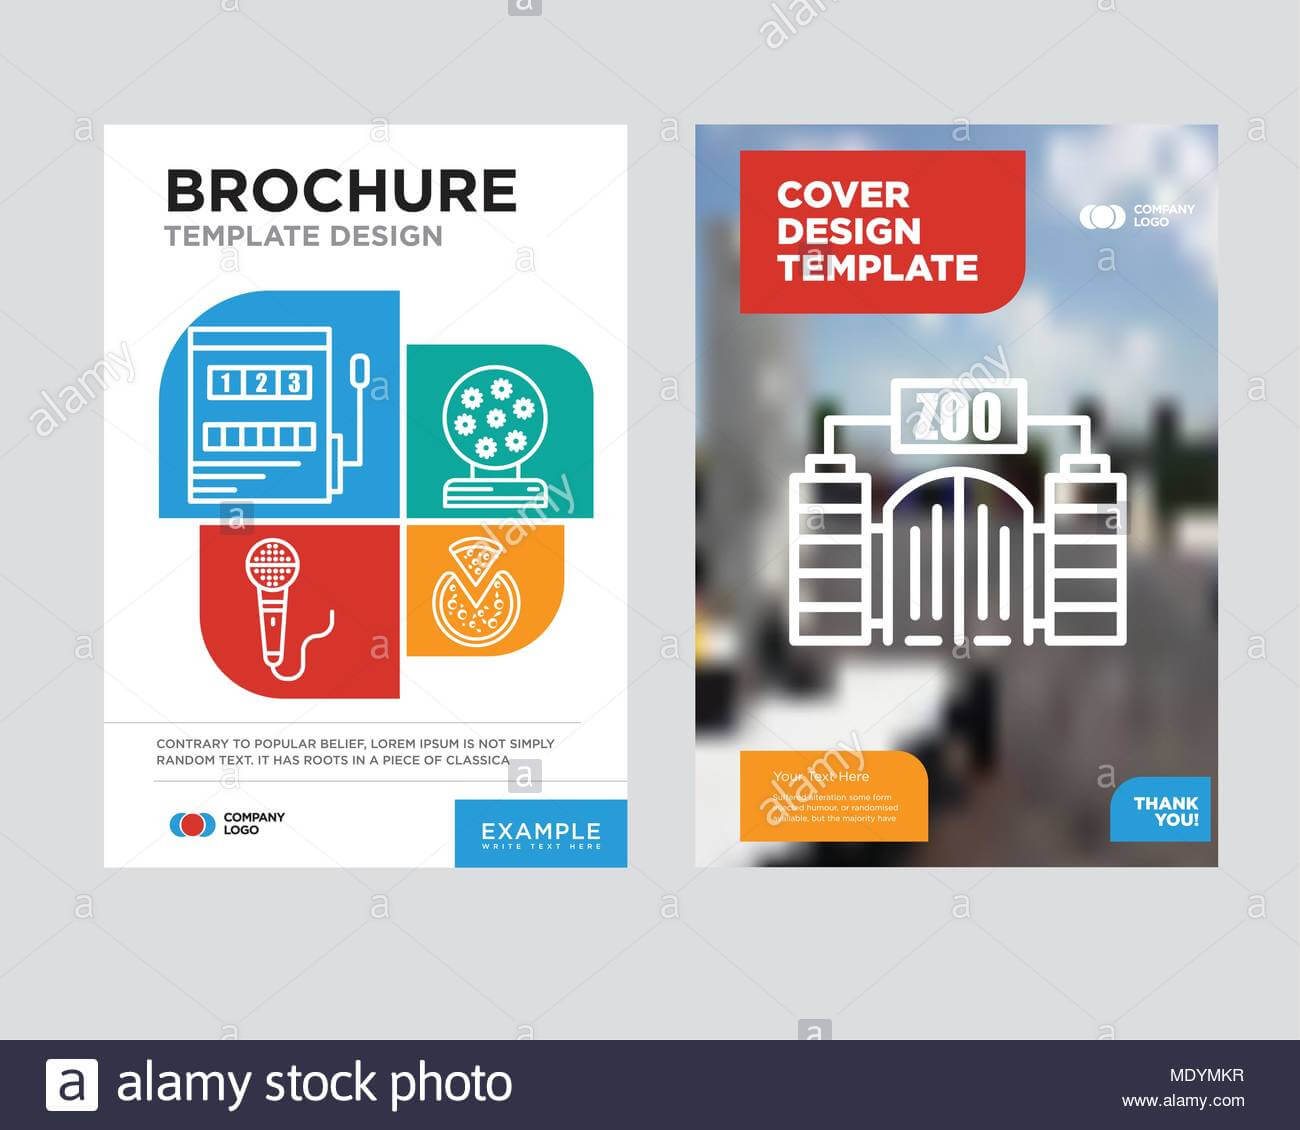 Zoo Brochure Flyer Design Template With Abstract Photo Within Zoo Brochure Template